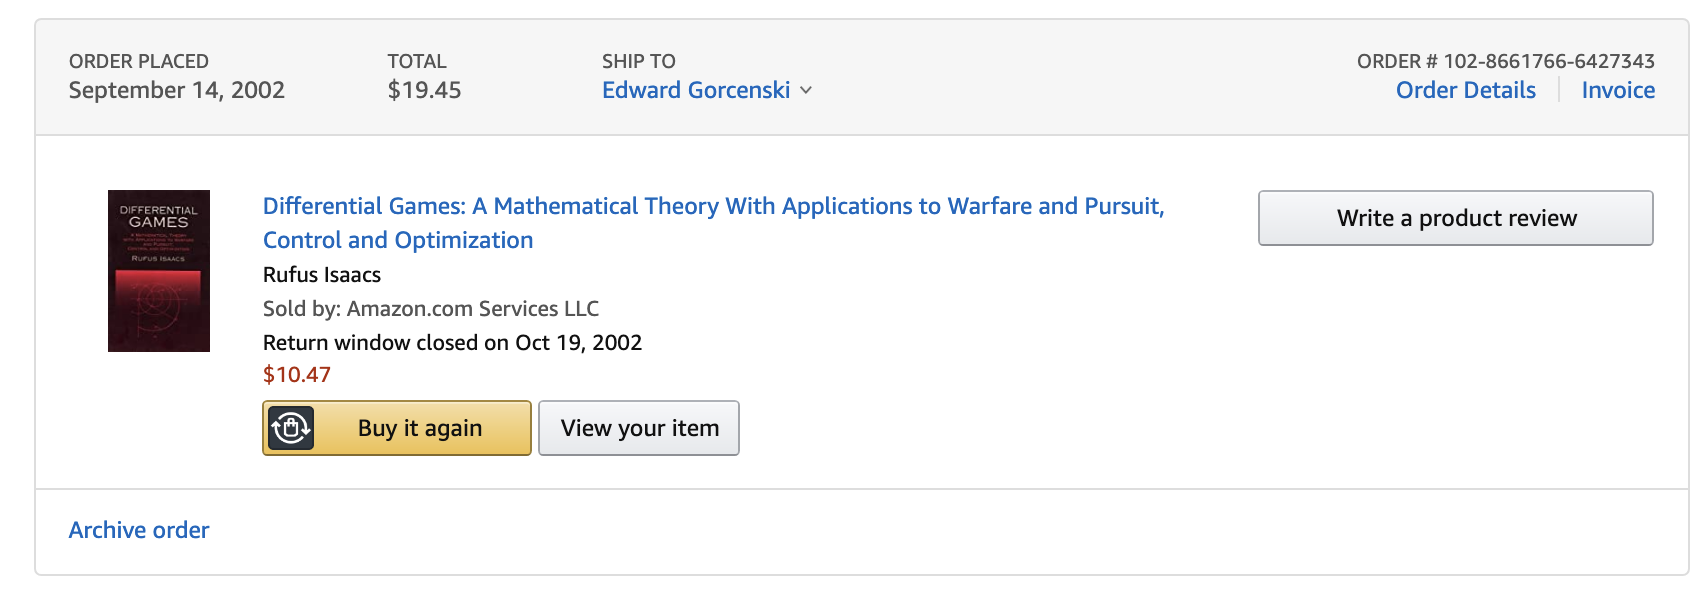 My Amazon.com order of Rufus Isaacs' book in September 2002